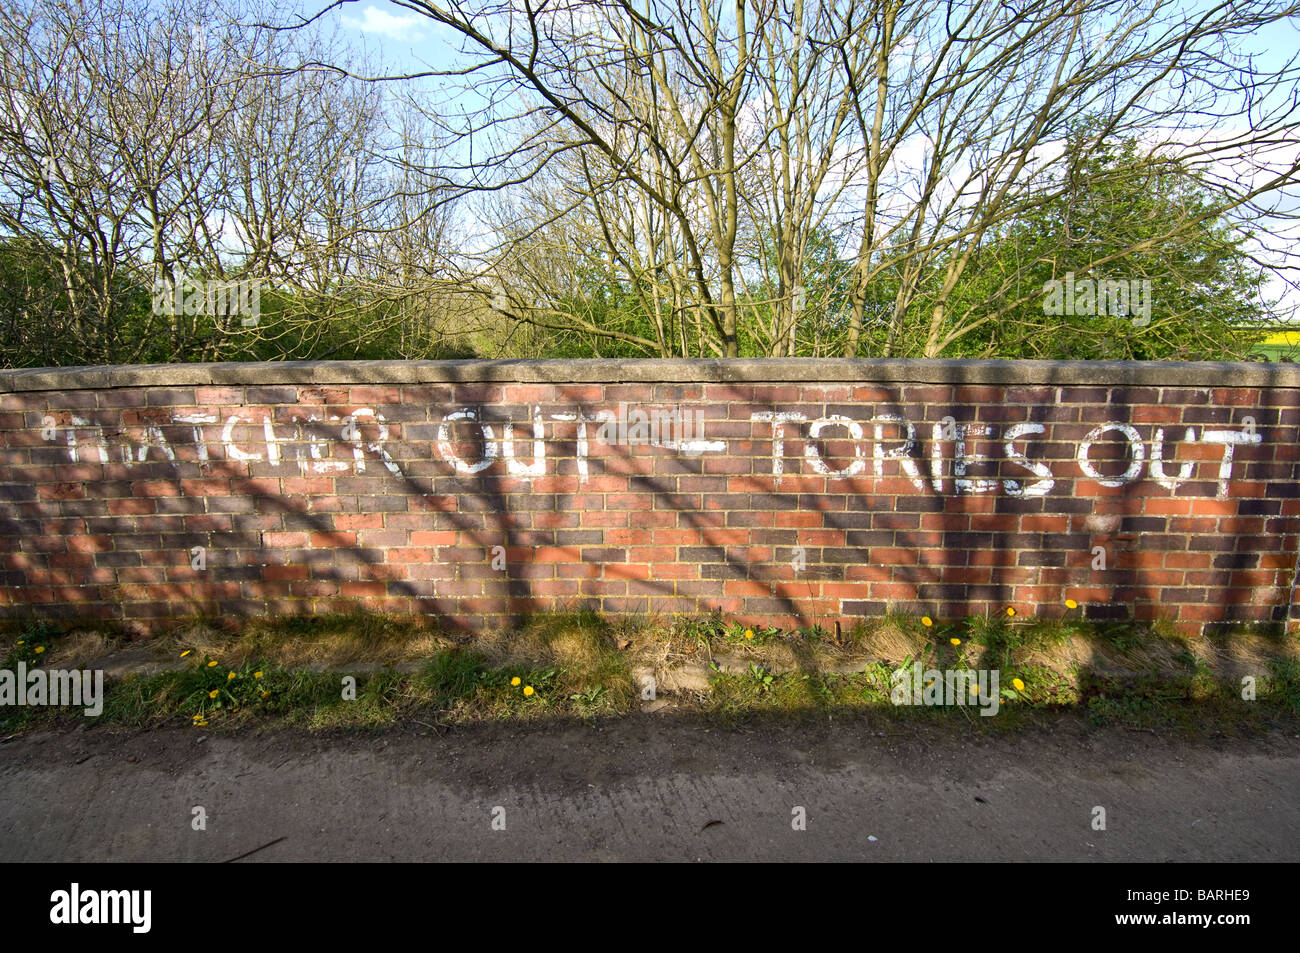 Thatcher out Tories out, a political message painted onto a brick wall Stock Photo